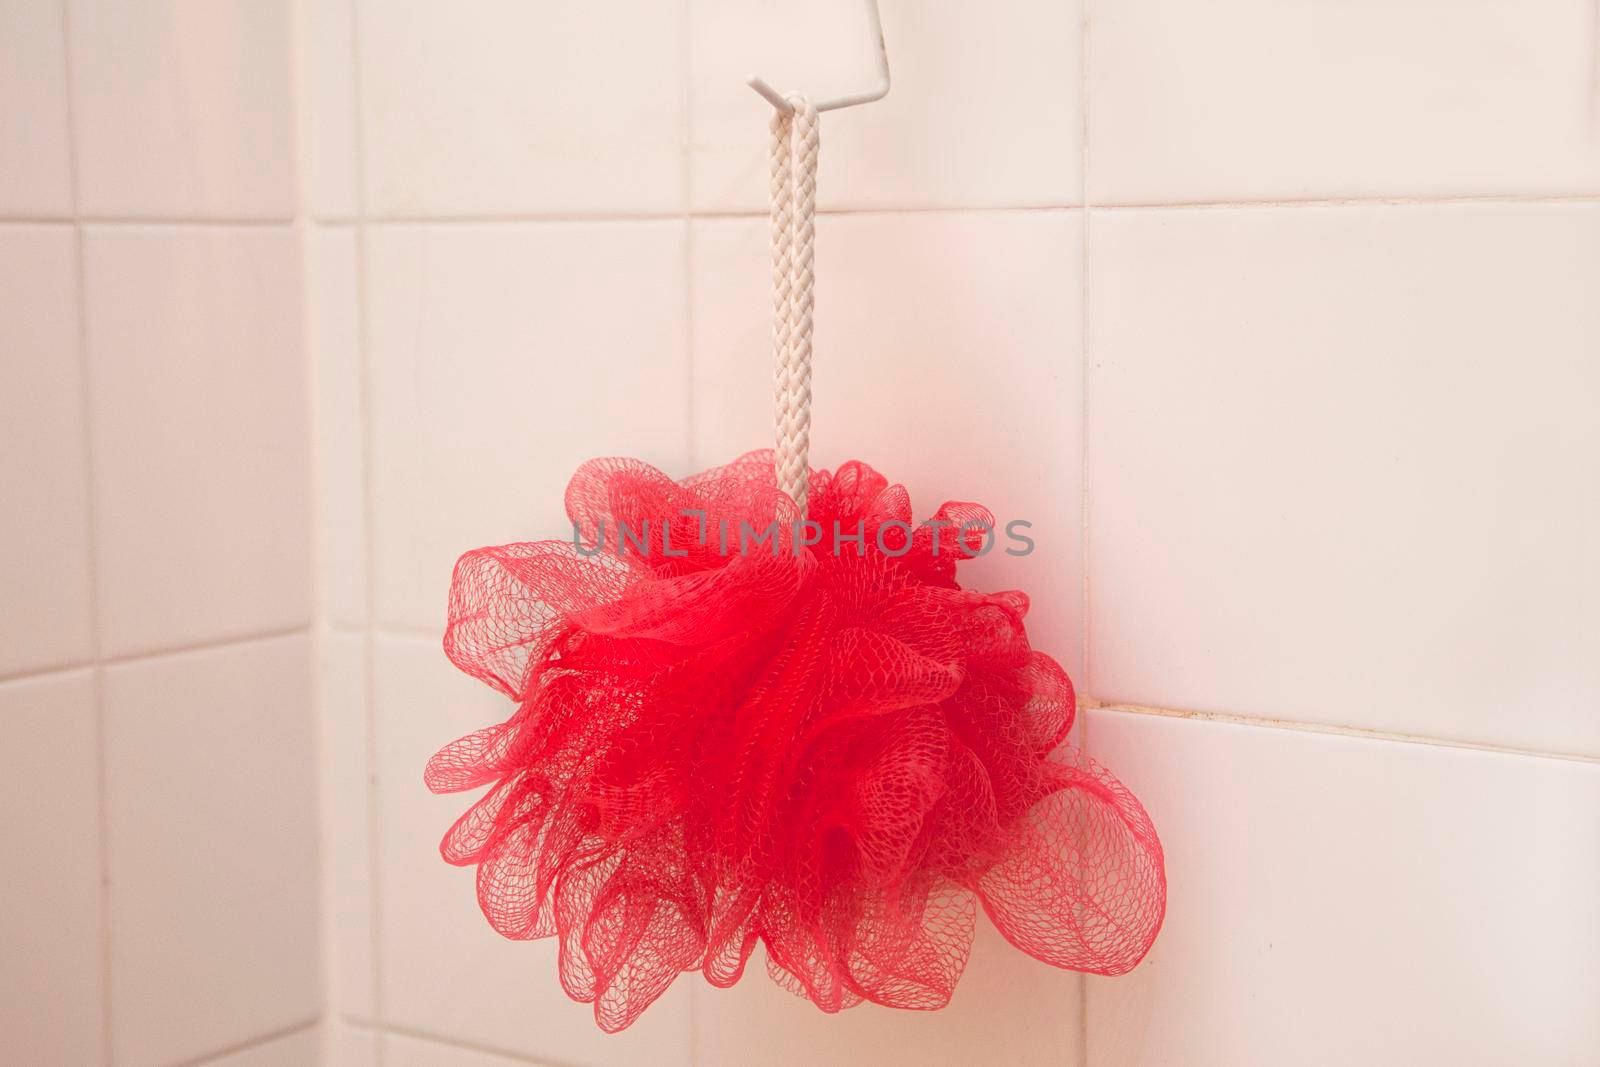 A red mesh scrubbing loofah hangs from a hook in a shower or bath